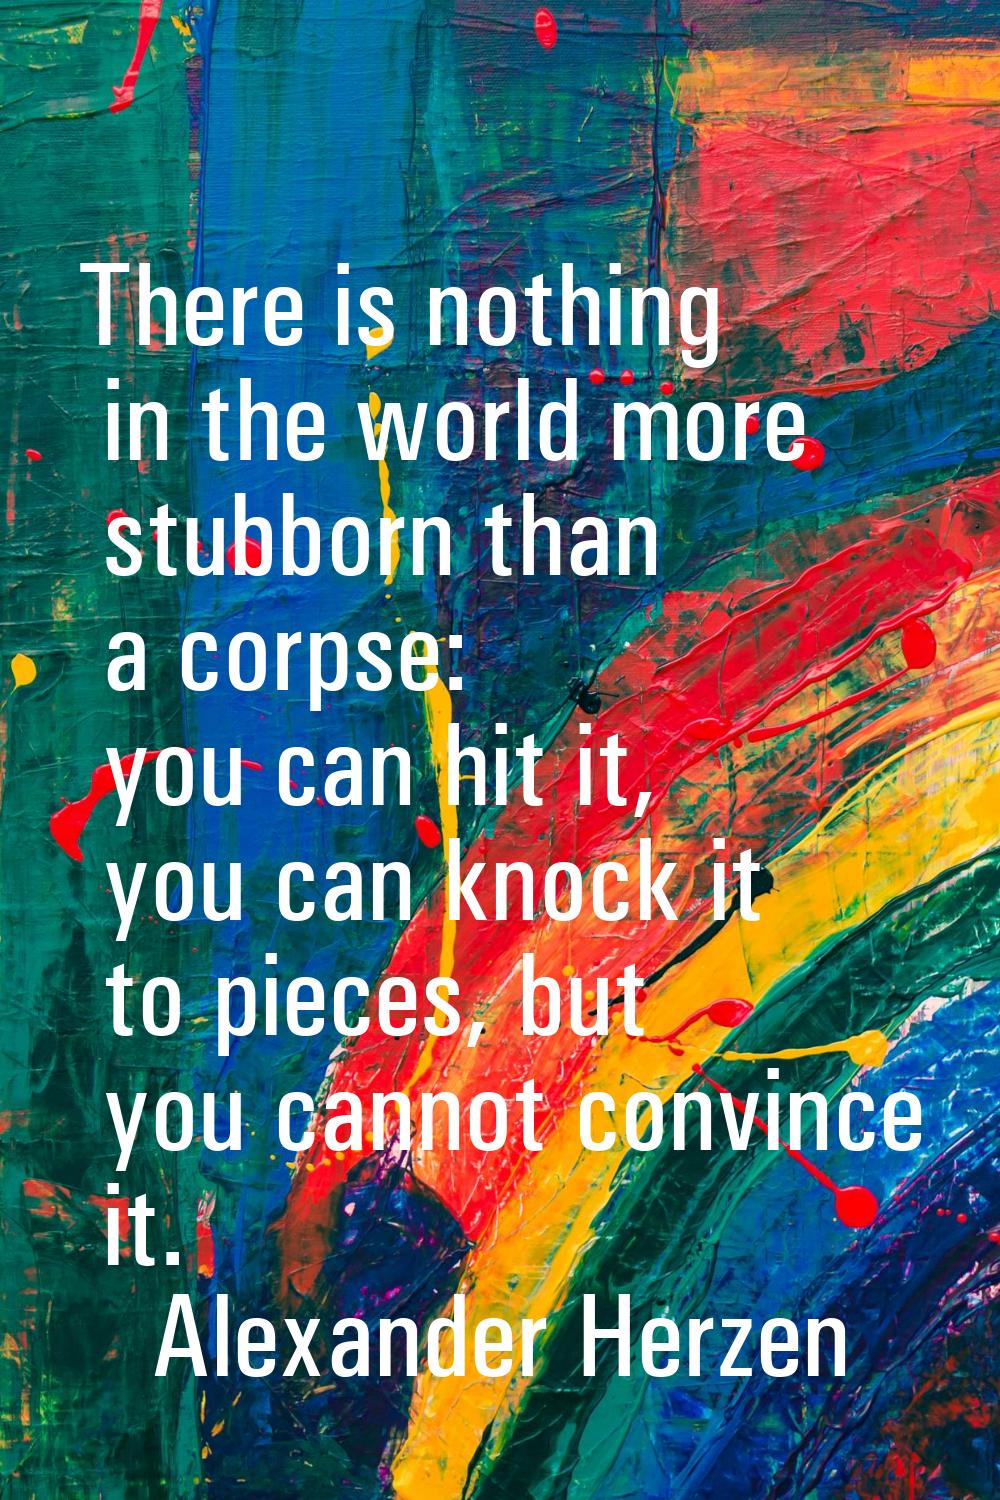 There is nothing in the world more stubborn than a corpse: you can hit it, you can knock it to piec